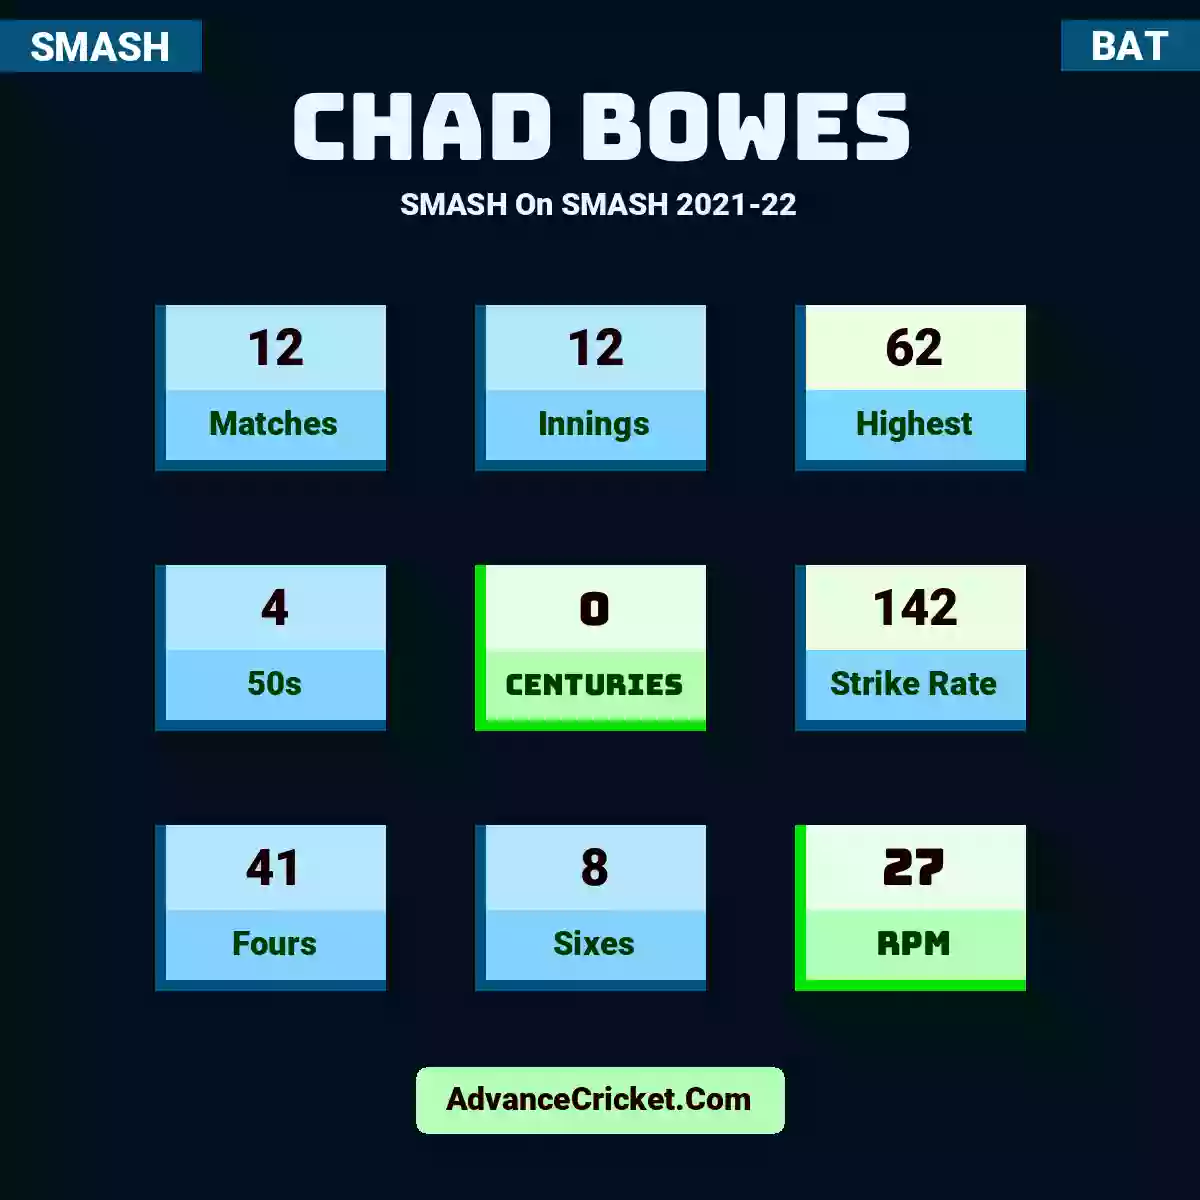 Chad Bowes SMASH  On SMASH 2021-22, Chad Bowes played 12 matches, scored 62 runs as highest, 4 half-centuries, and 0 centuries, with a strike rate of 142. C.Bowes hit 41 fours and 8 sixes, with an RPM of 27.